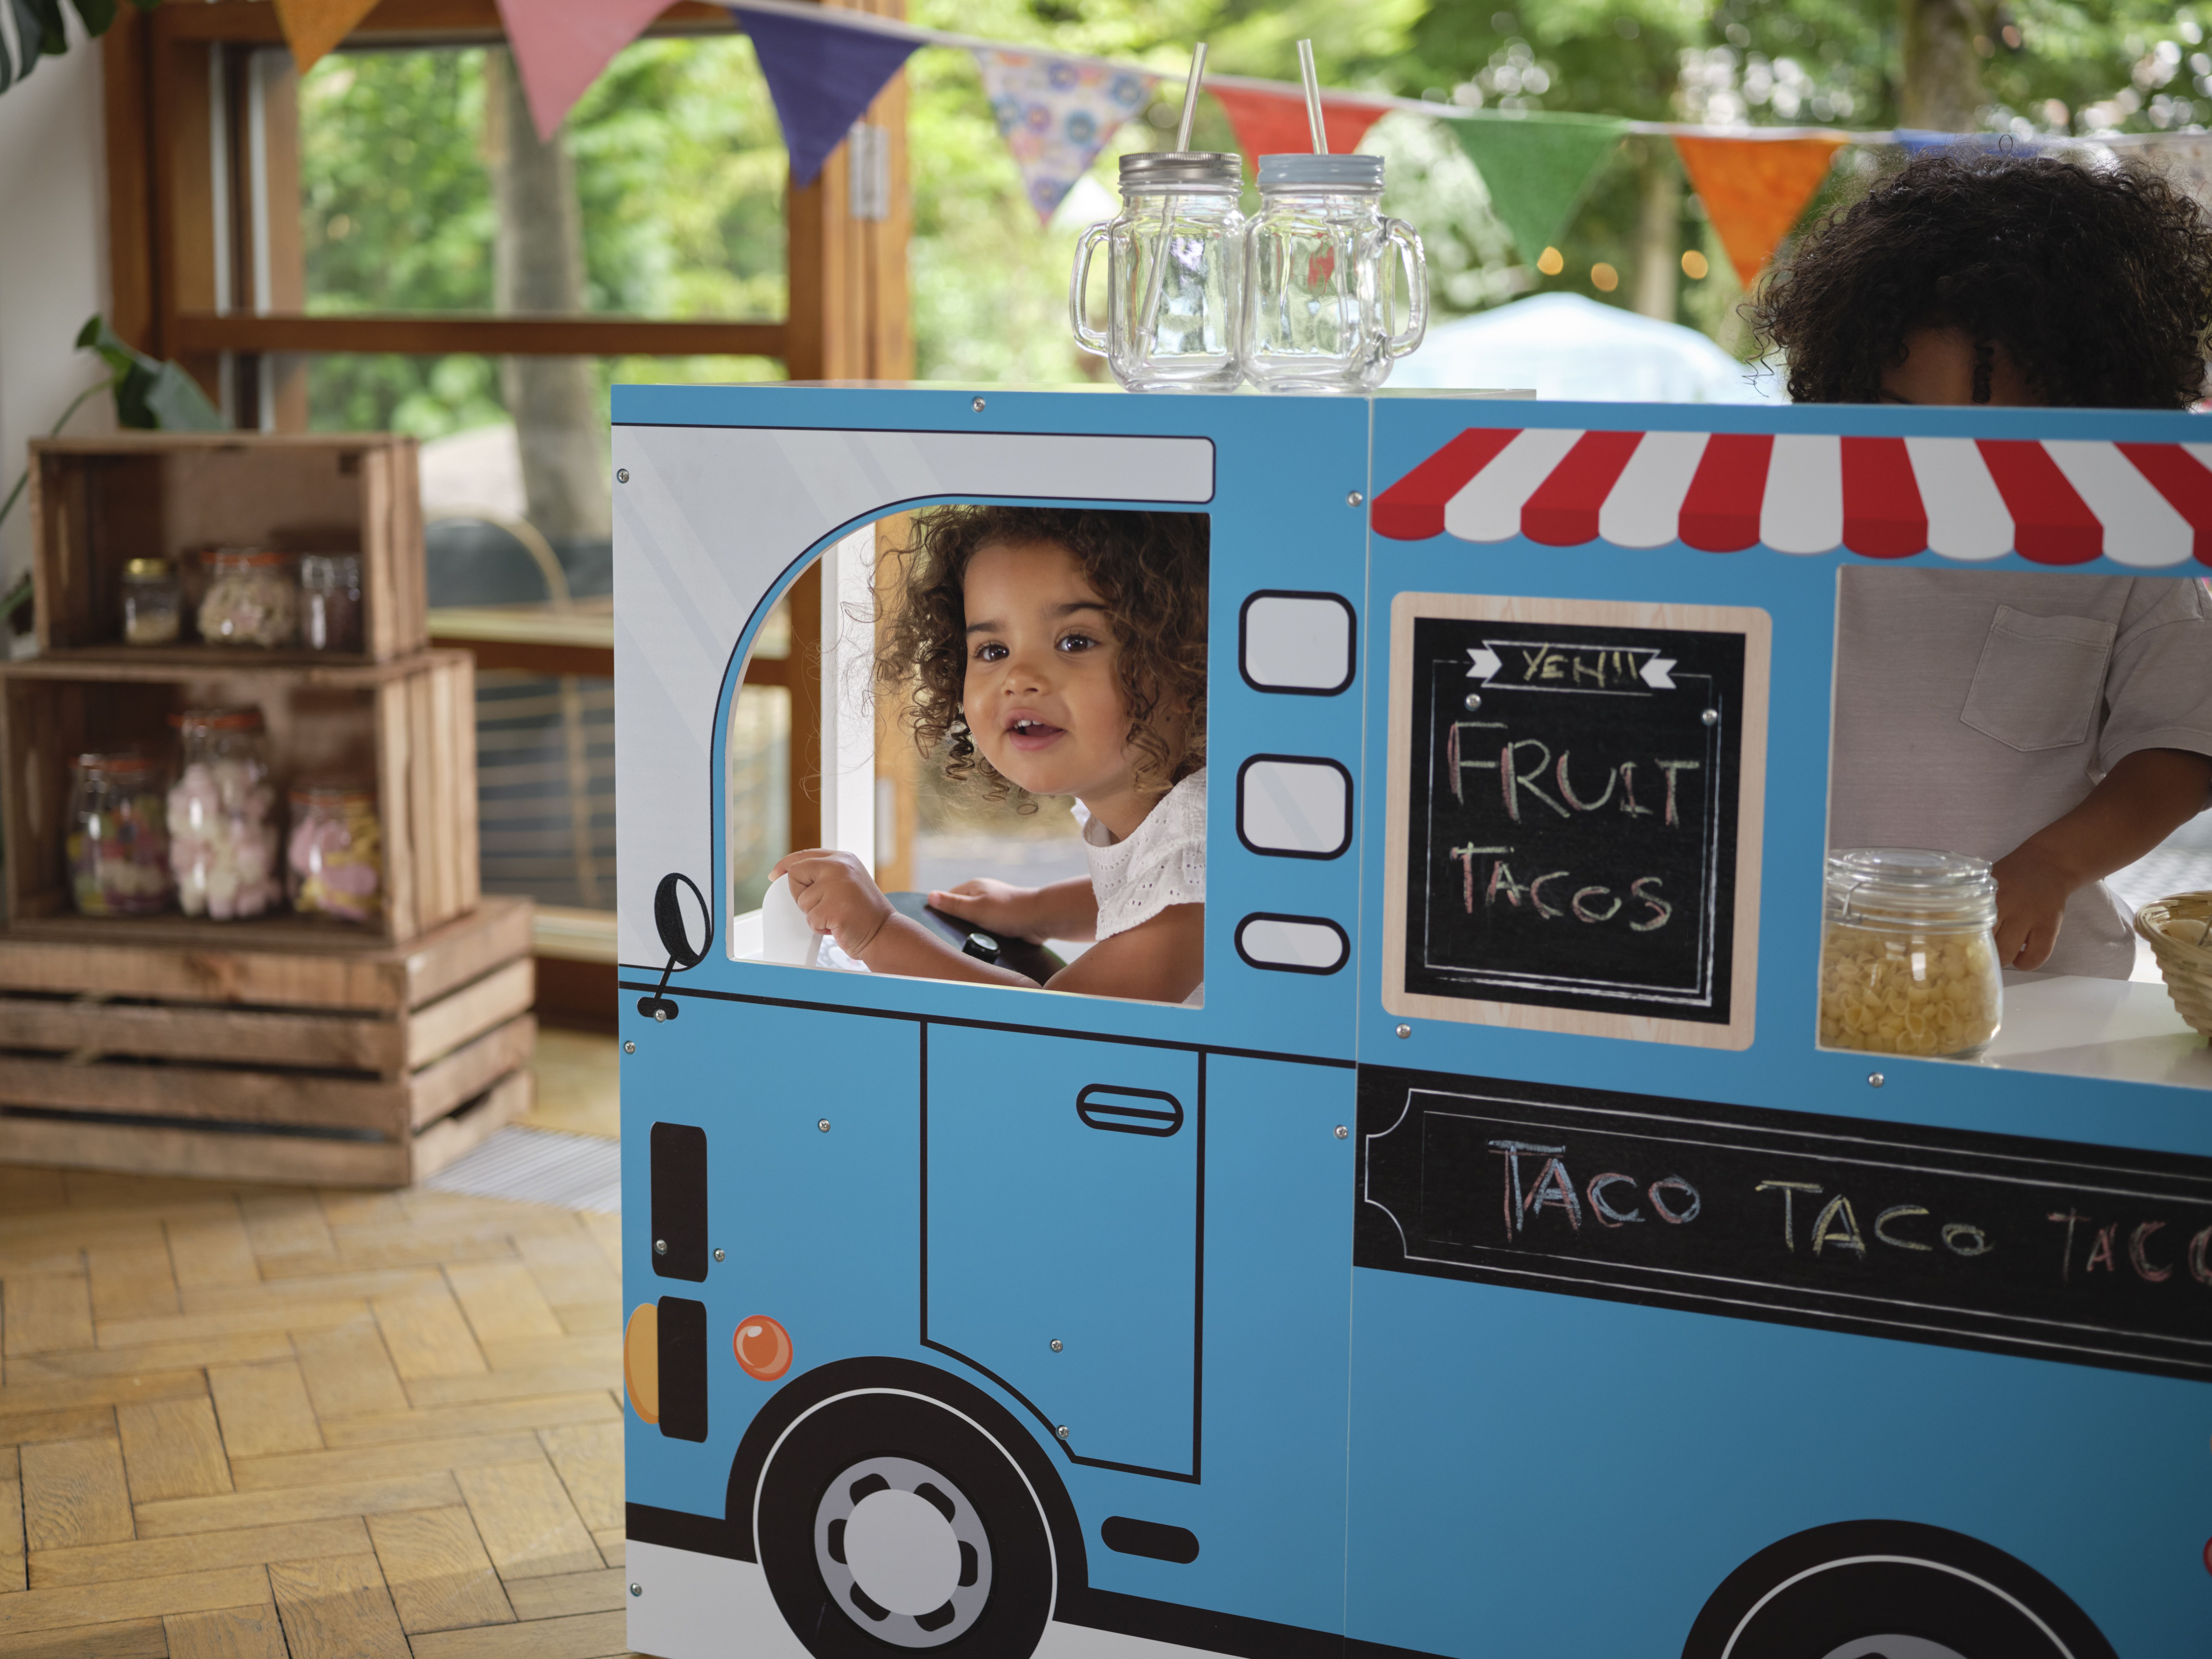 Plum Play 3-in-1 Wooden Street Food Truck and Kitchen with Driving Cab, #41108AD83, Light-Up Burners with Sound, Kitchen Utensils.  41.33" x 12" x 31.5" - image 5 of 19